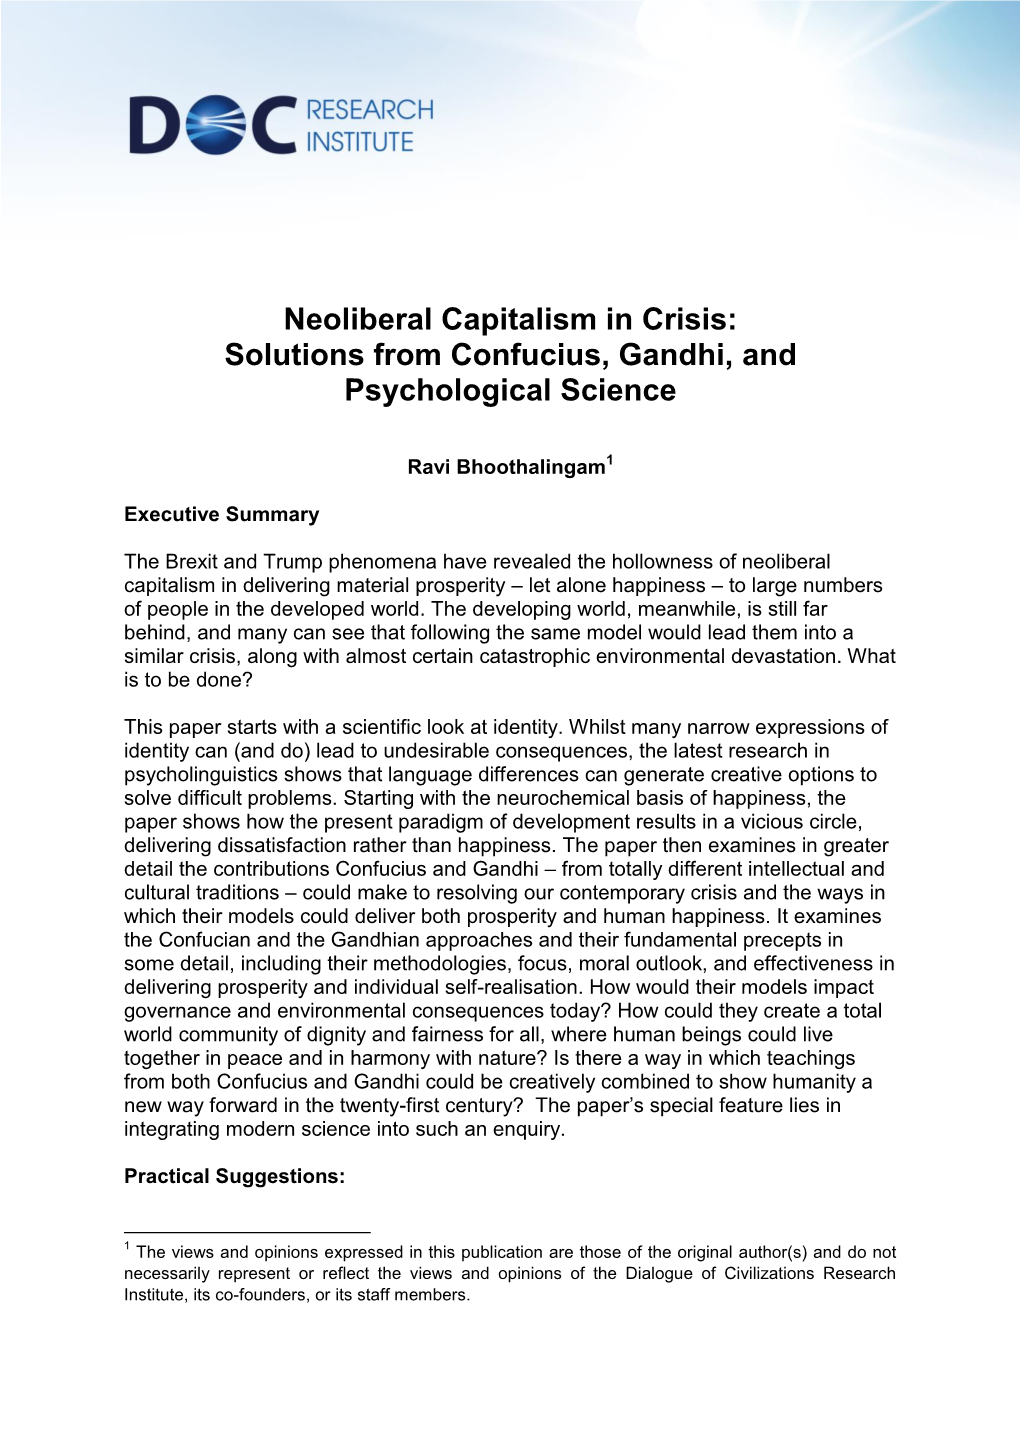 Neoliberal Capitalism in Crisis: Solutions from Confucius, Gandhi, and Psychological Science